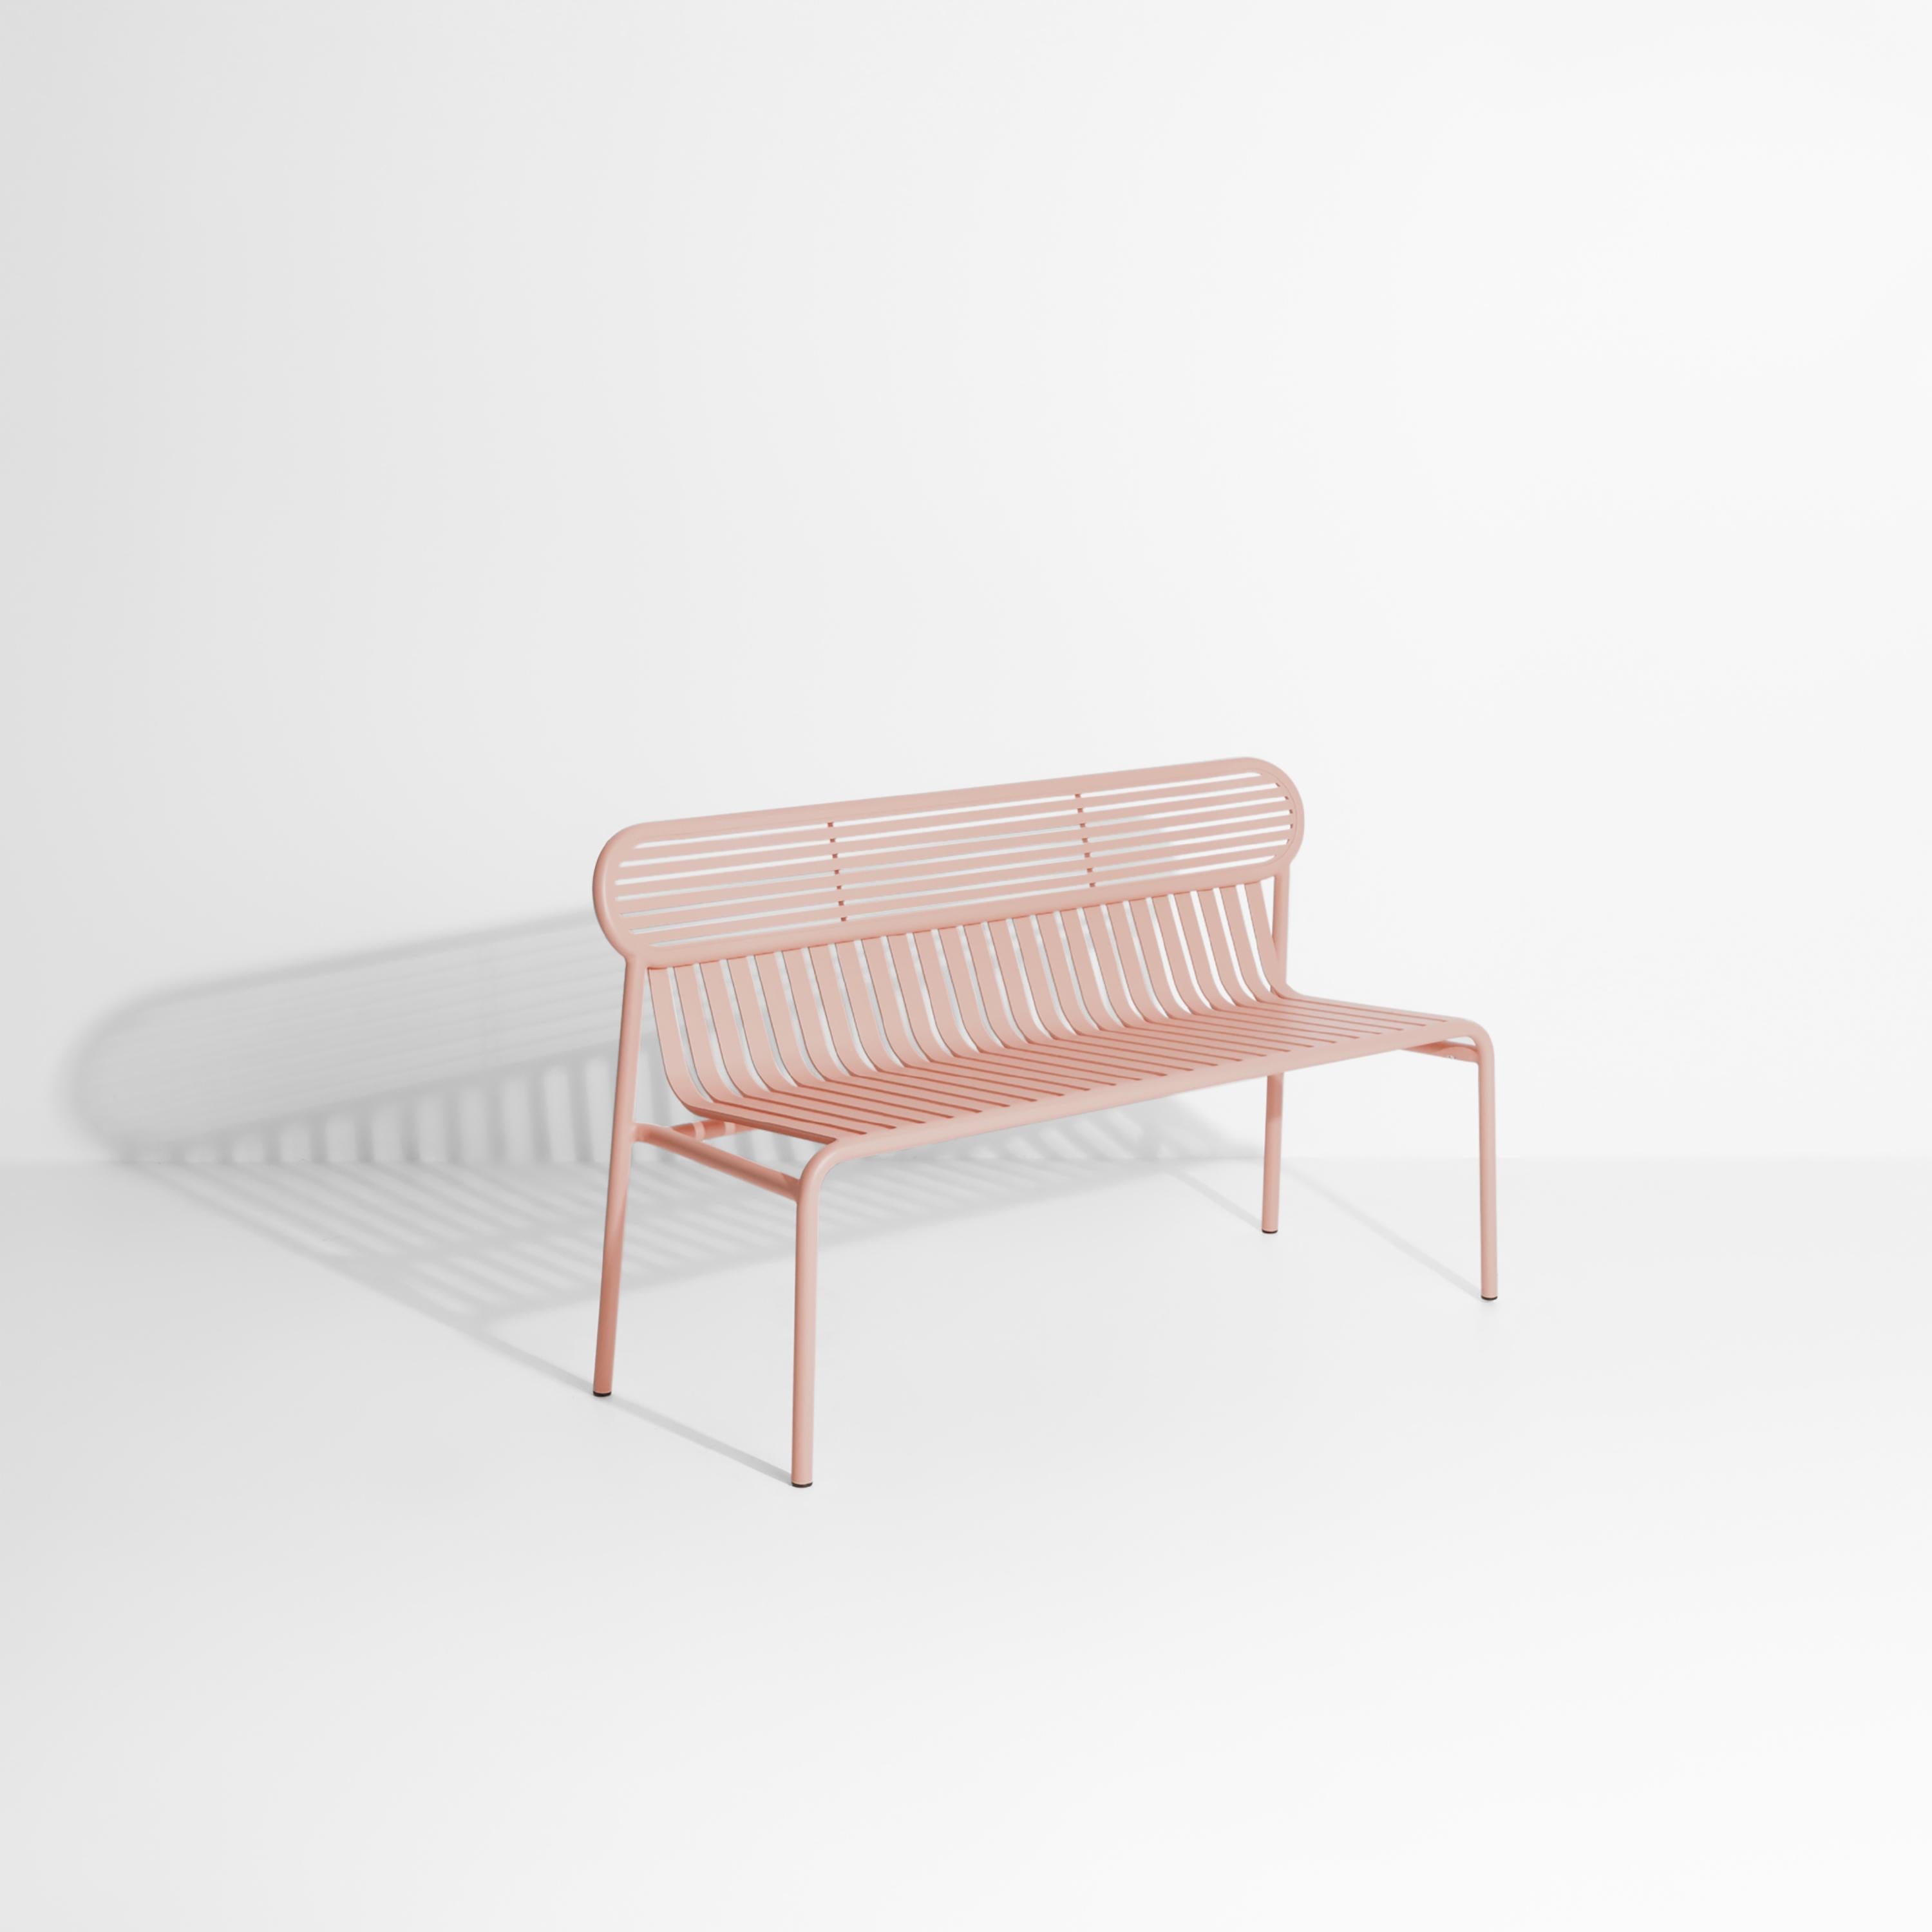 Petite Friture Week-End Bench in Blush Aluminium by Studio BrichetZiegler, 2017

The week-end collection is a full range of outdoor furniture, in aluminium grained epoxy paint, matt finish, that includes 18 functions and 8 colours for the retail